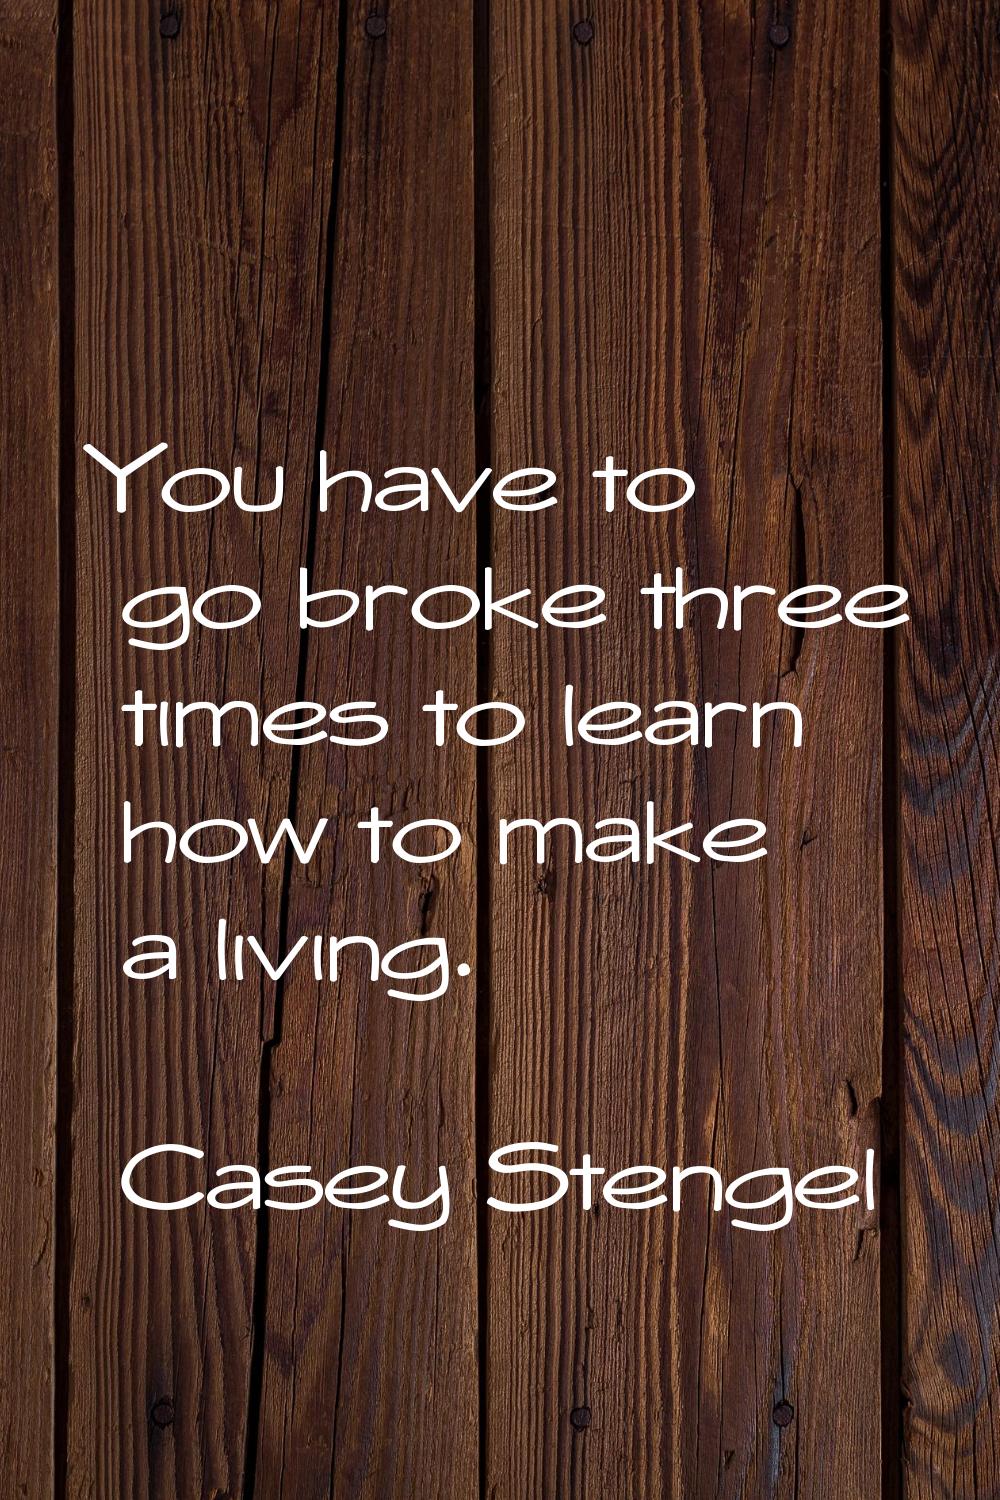 You have to go broke three times to learn how to make a living.